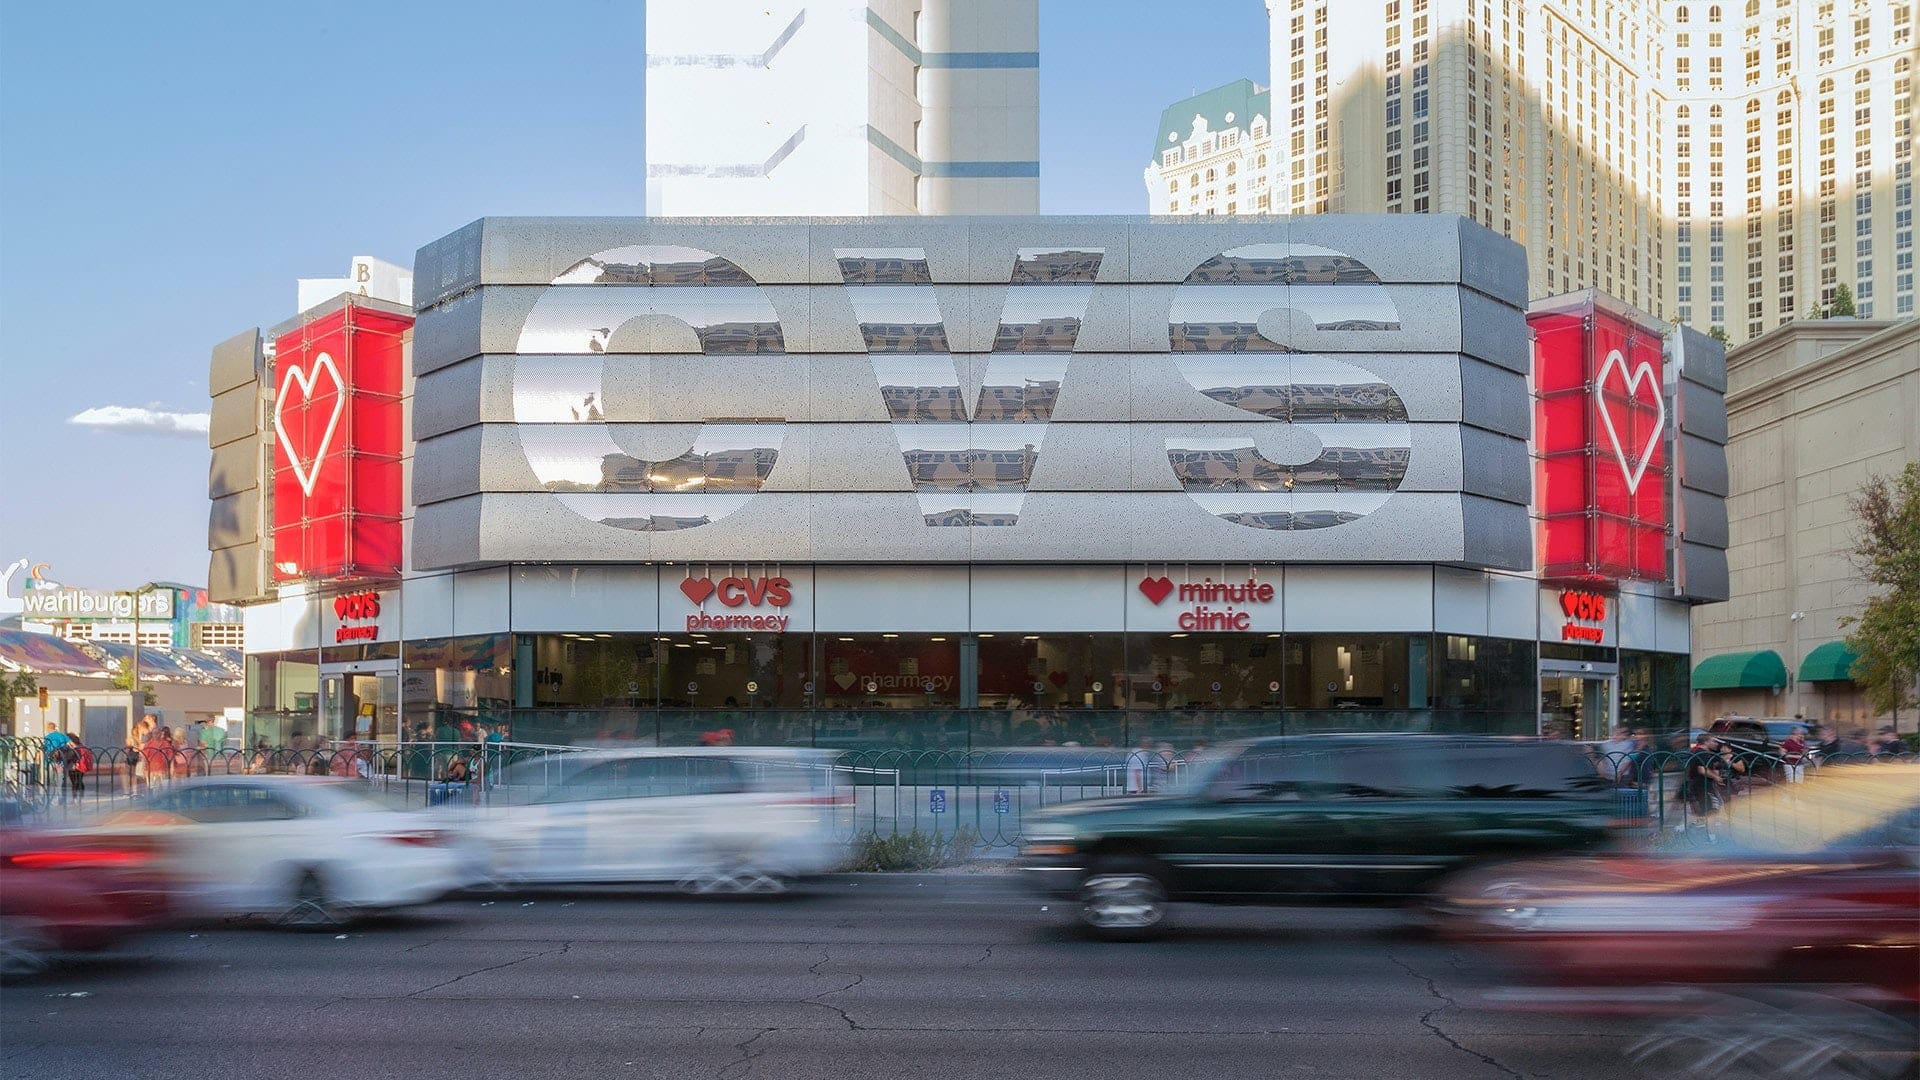 Stainless steel finished with selective polishing creates a unique effect for signage at CVS's Las Vegas flagship store.